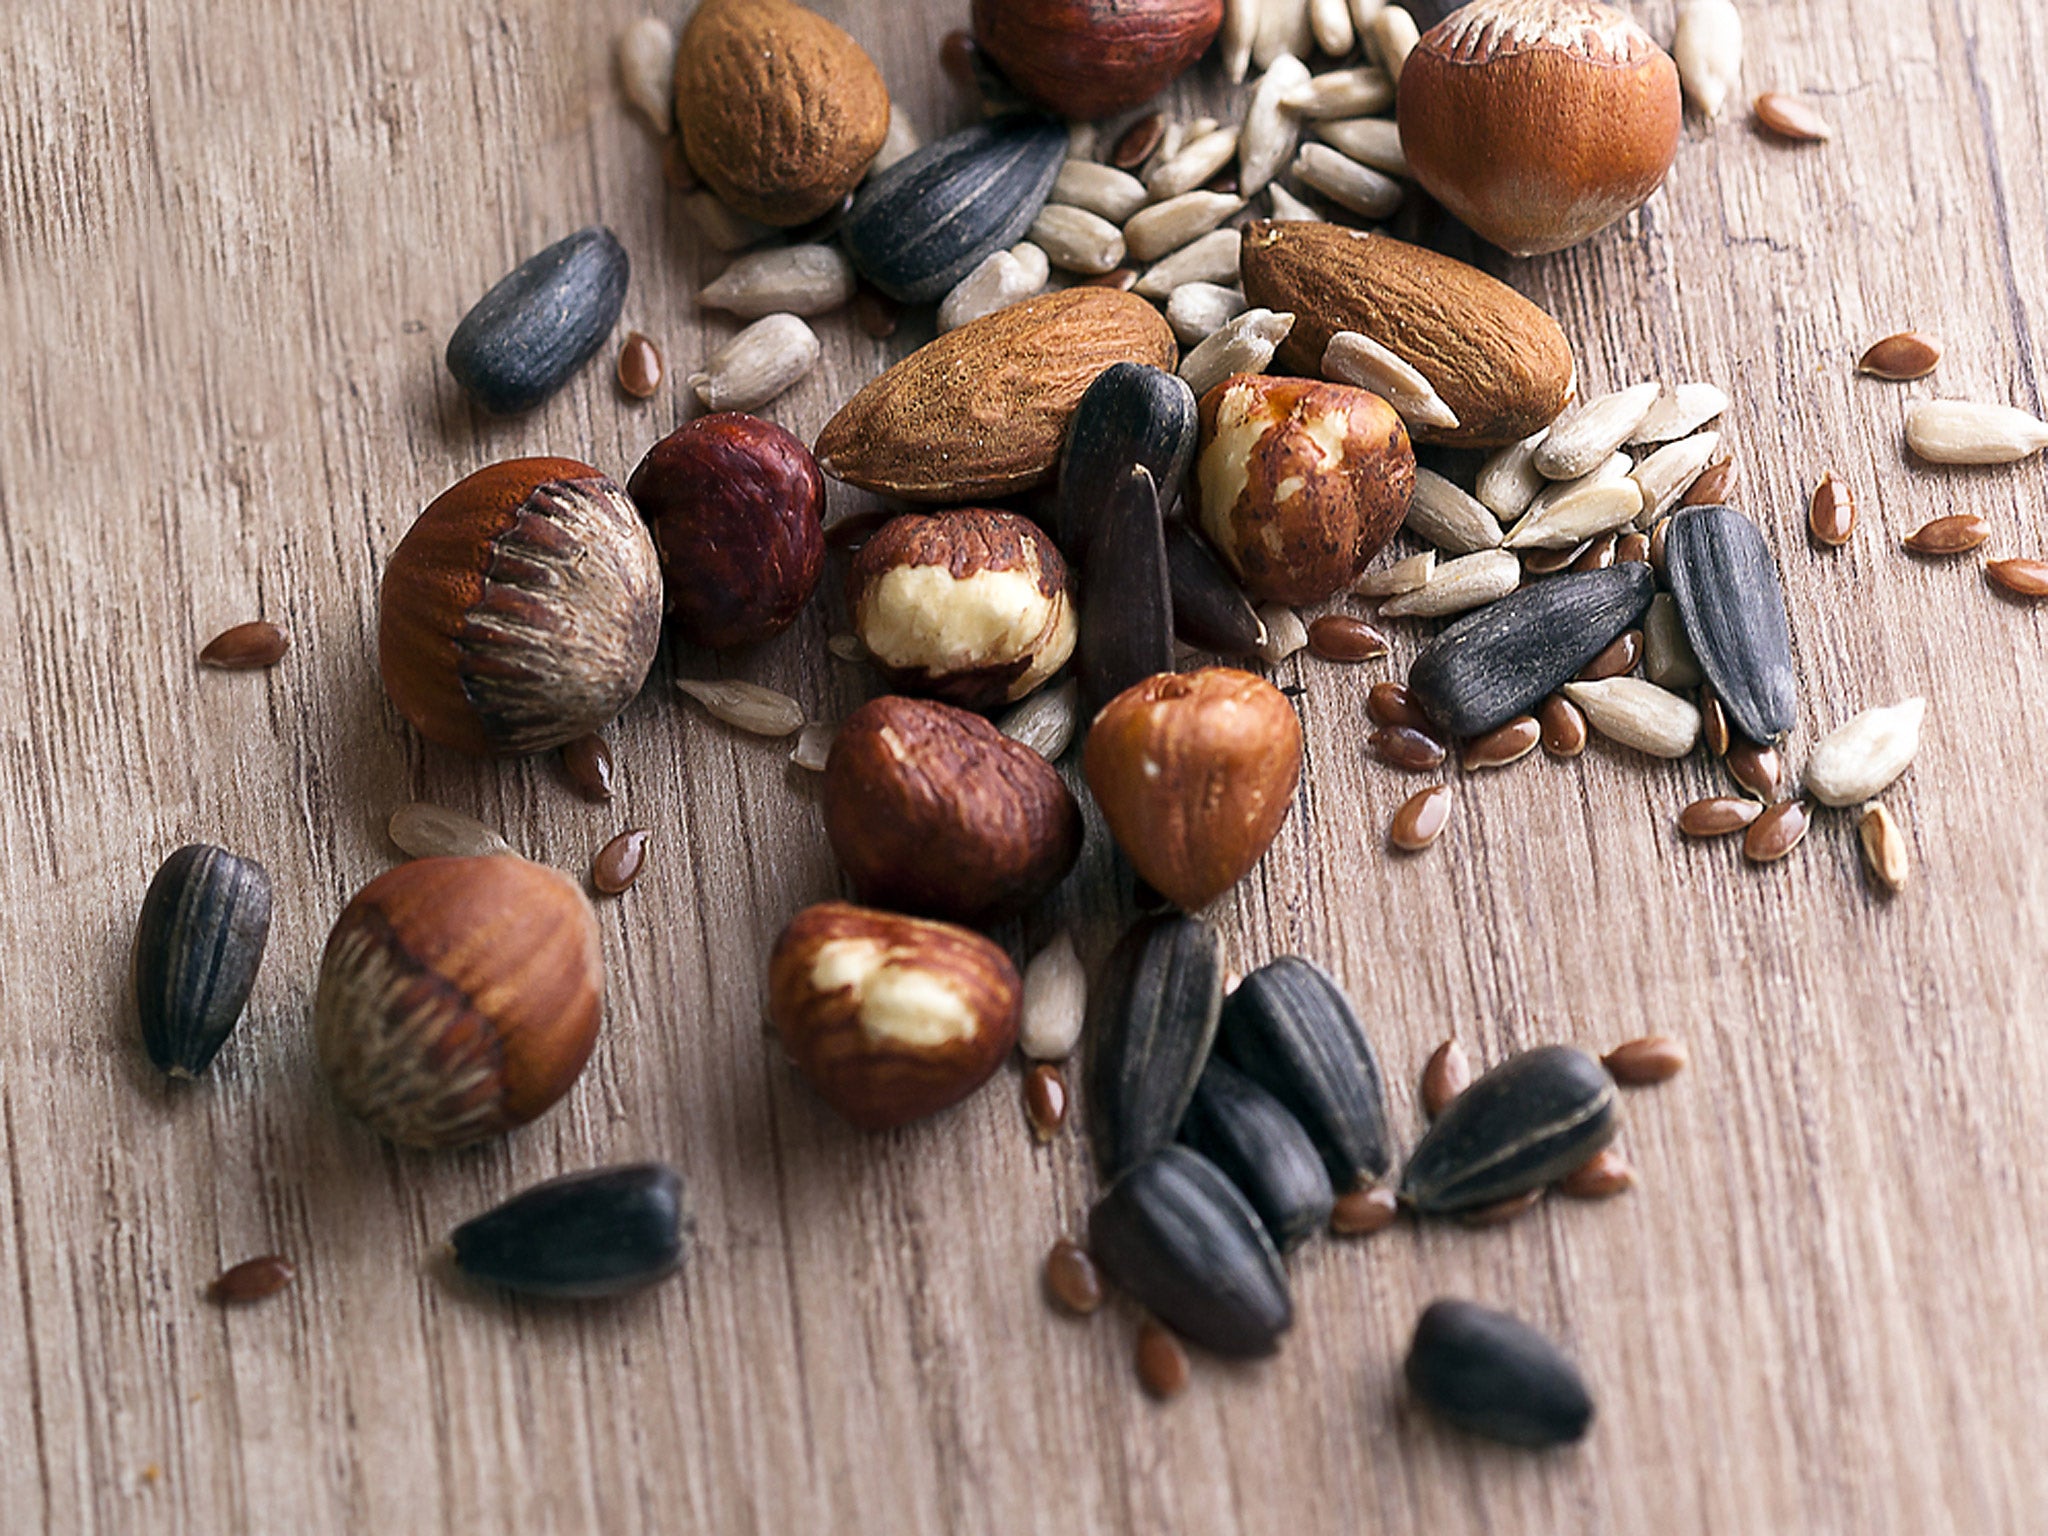 The study covered all kinds of tree nuts, such as hazelnuts and walnuts, as well as peanuts